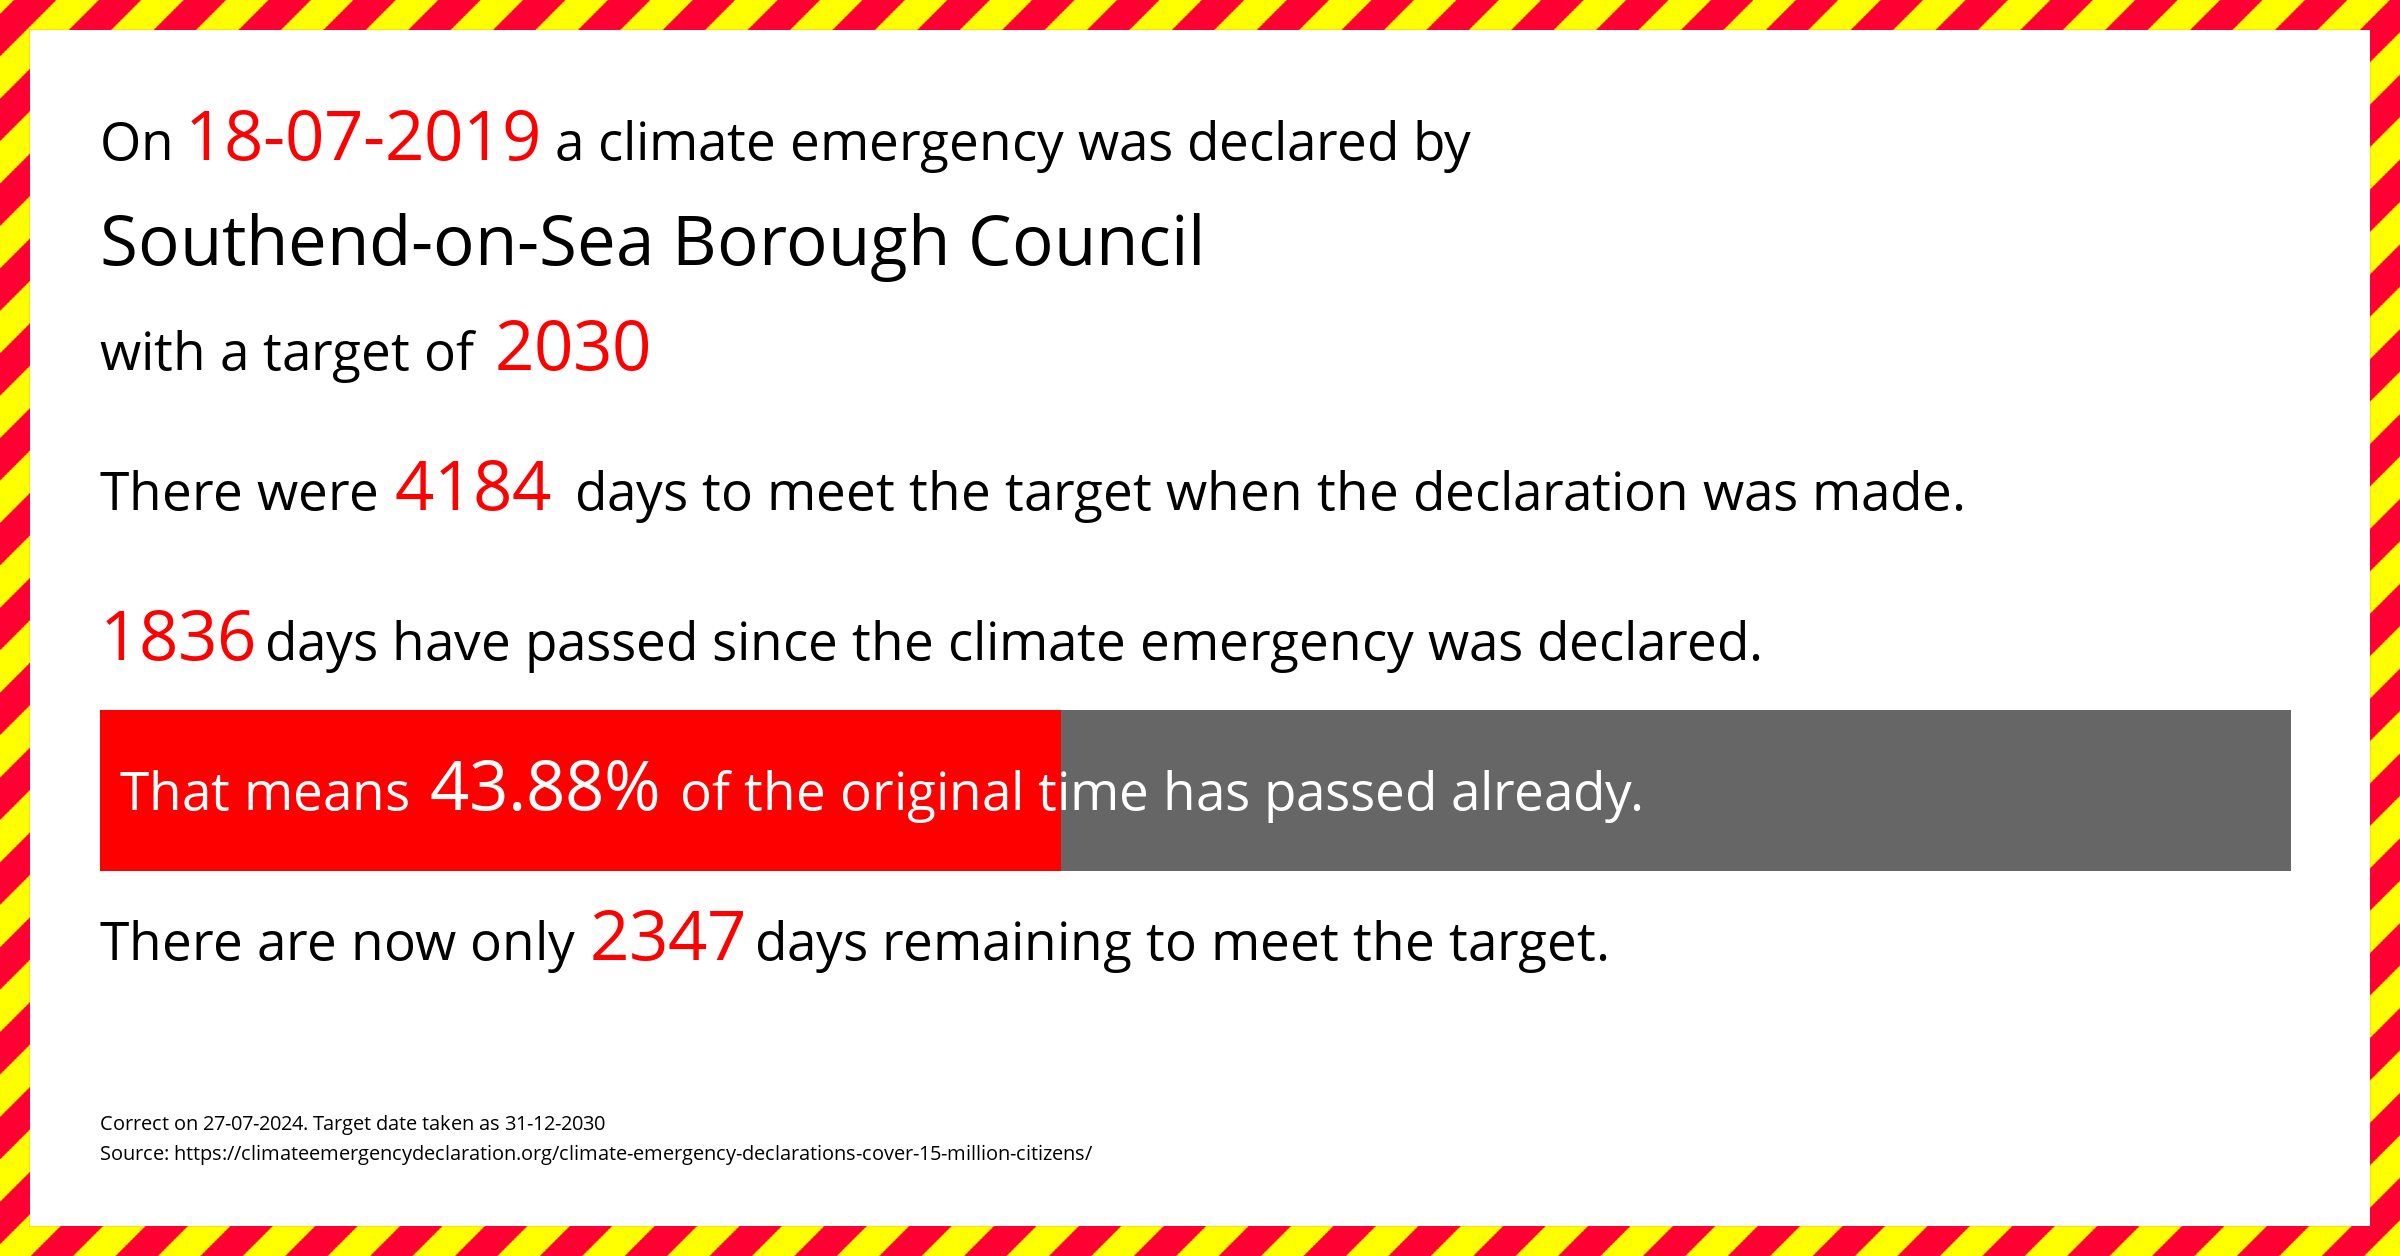 Southend-on-Sea Borough Council declared a Climate emergency on Thursday 18th July 2019, with a target of 2030.